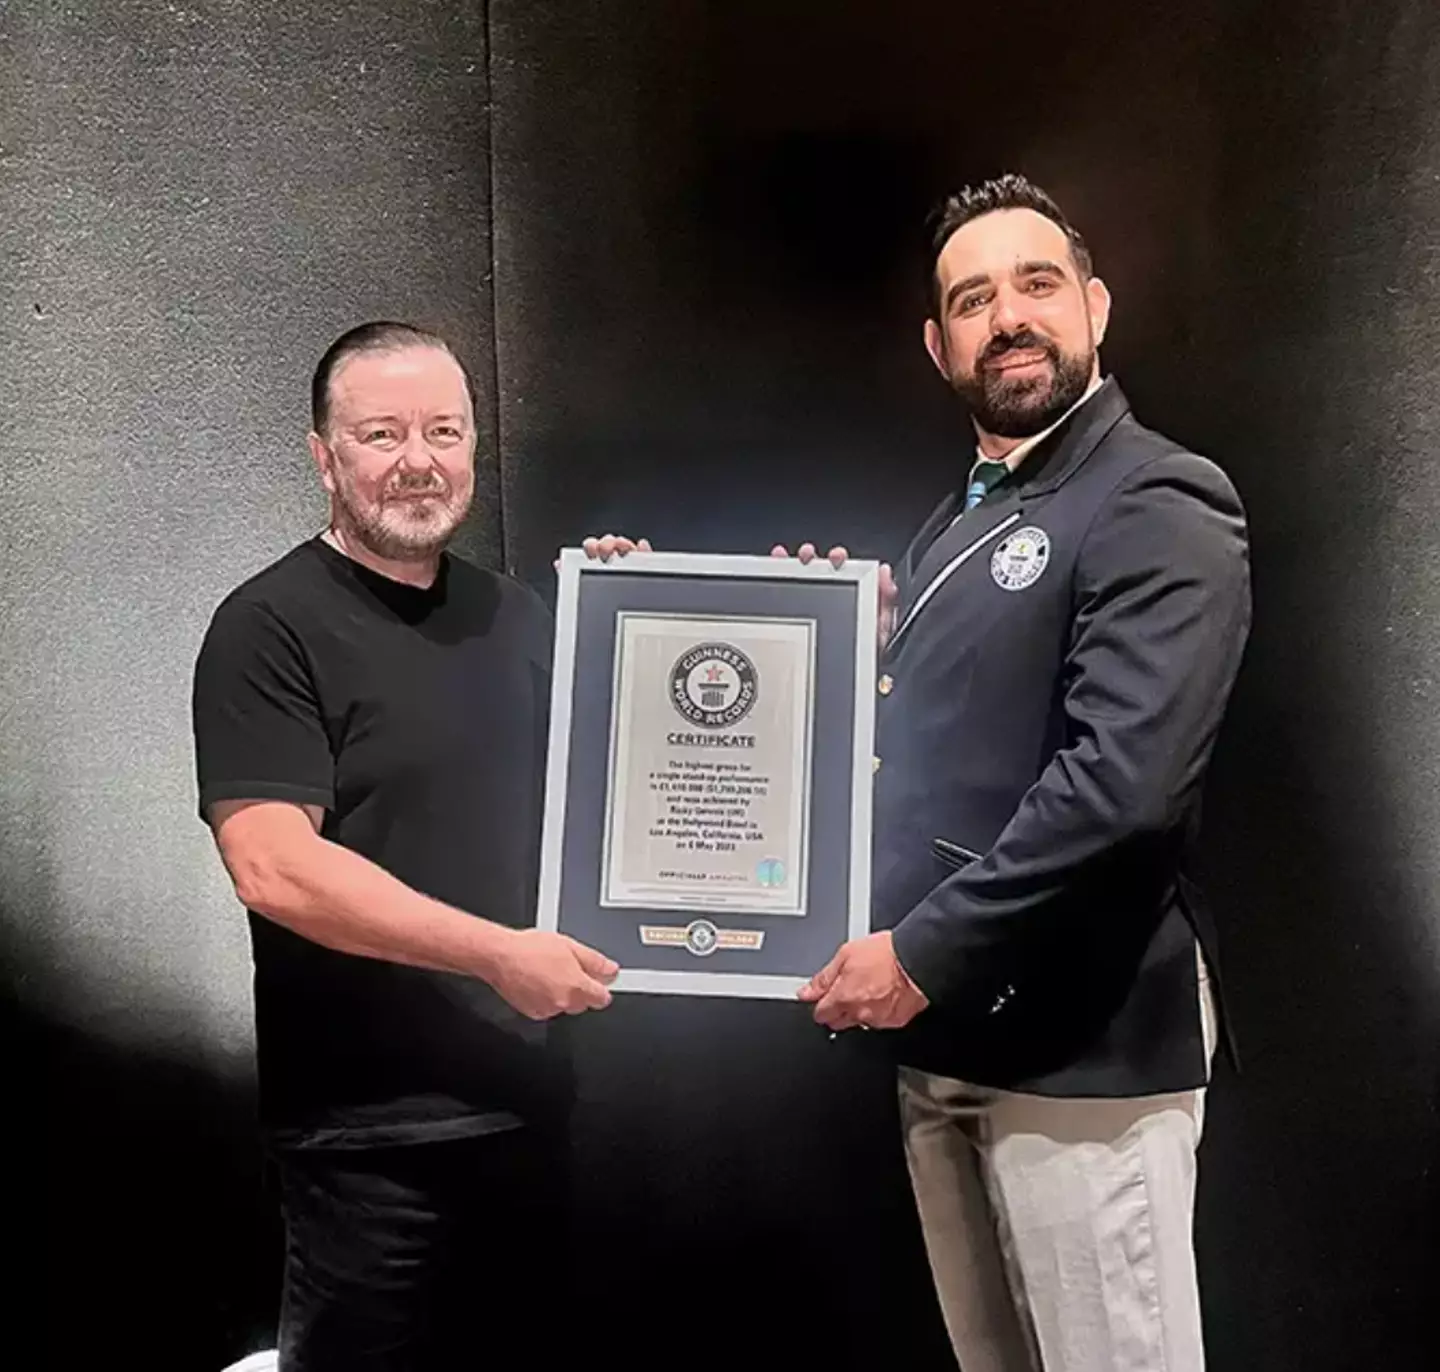 Ricky recently claimed a world record for his show at The Hollywood Bowl.